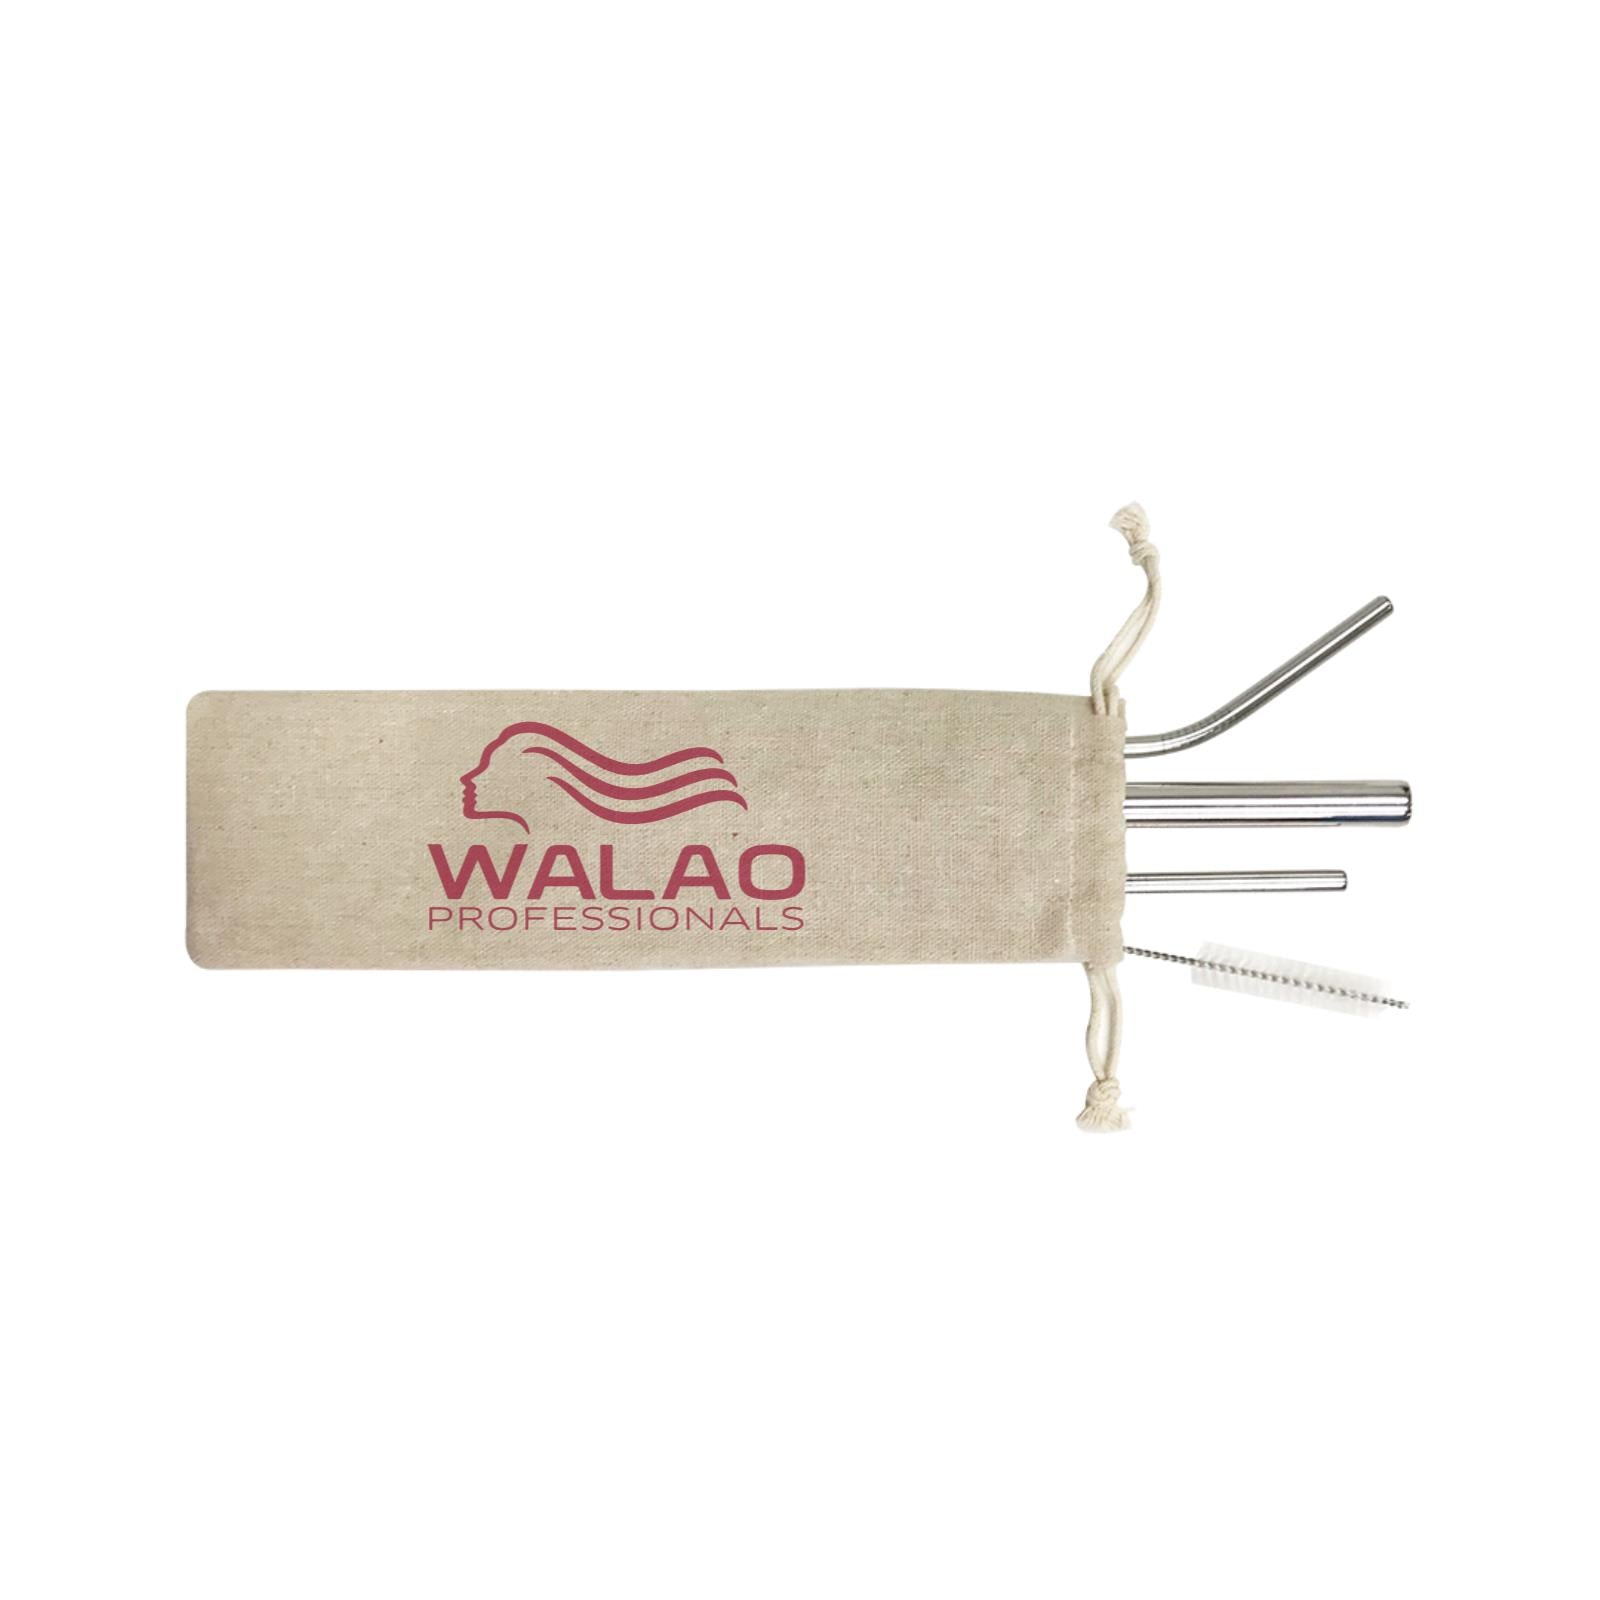 Slang Statement Walao Professional 4-in-1 Stainless Steel Straw Set In a Satchel